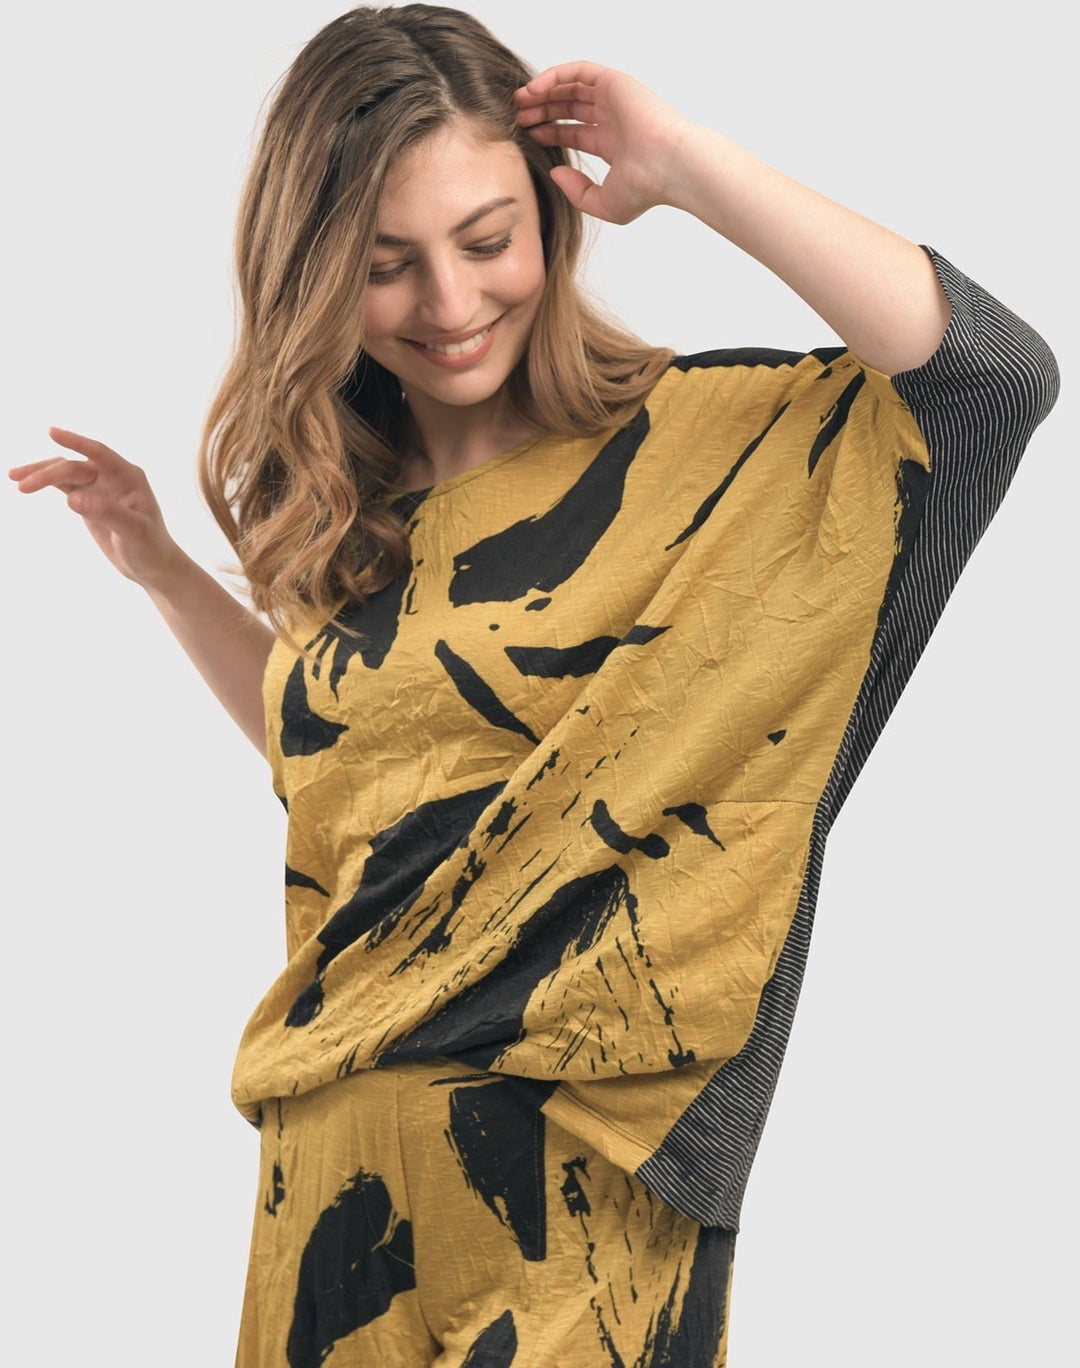 Yellow Crinkle Dolman Top for women over 50